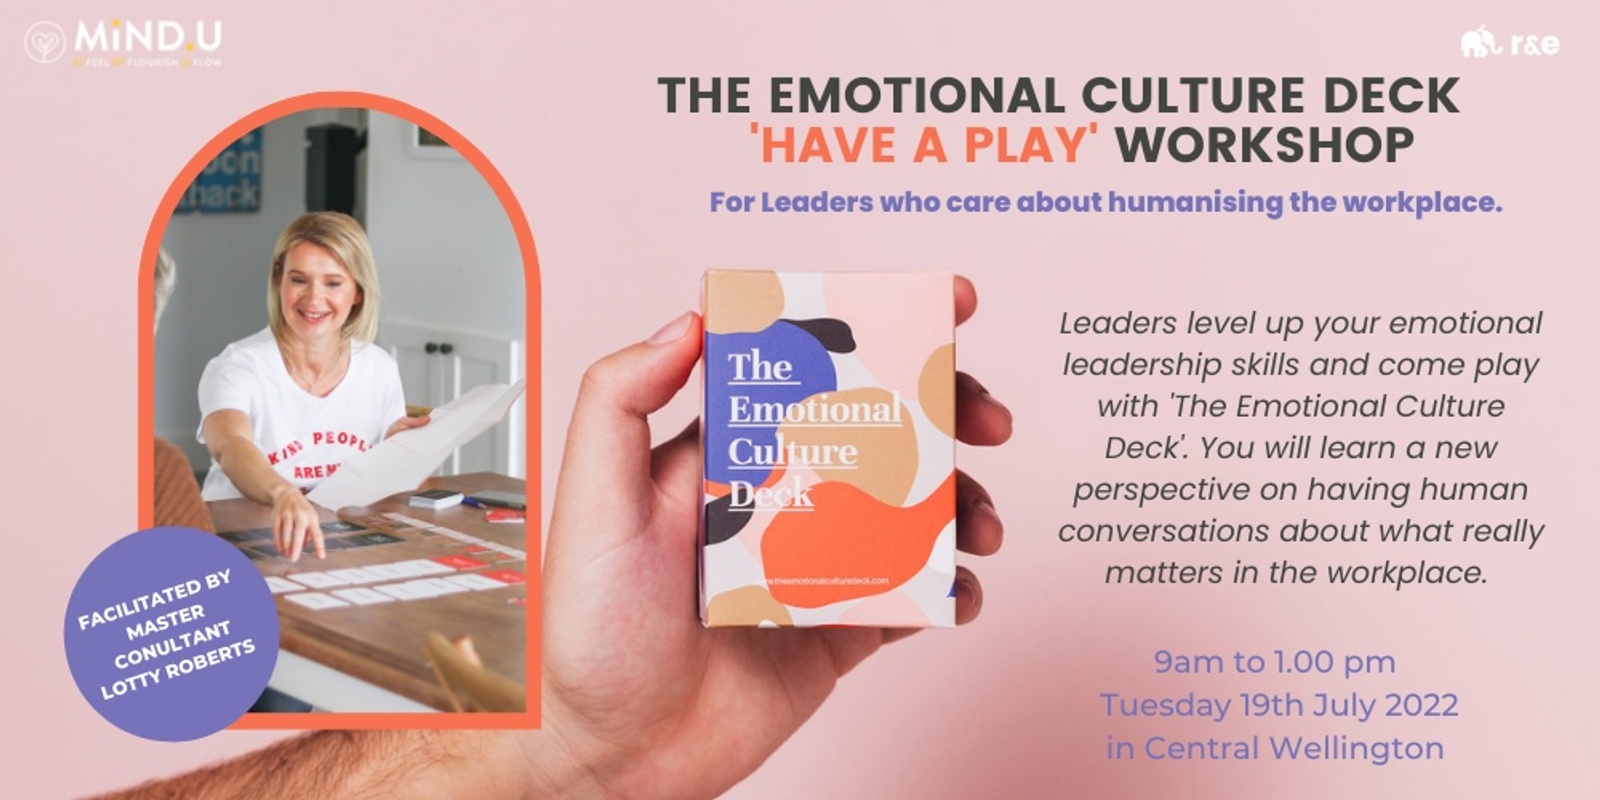 The Emotional Culture Deck 'Have a Play' - workshop presented by Lotty Roberts